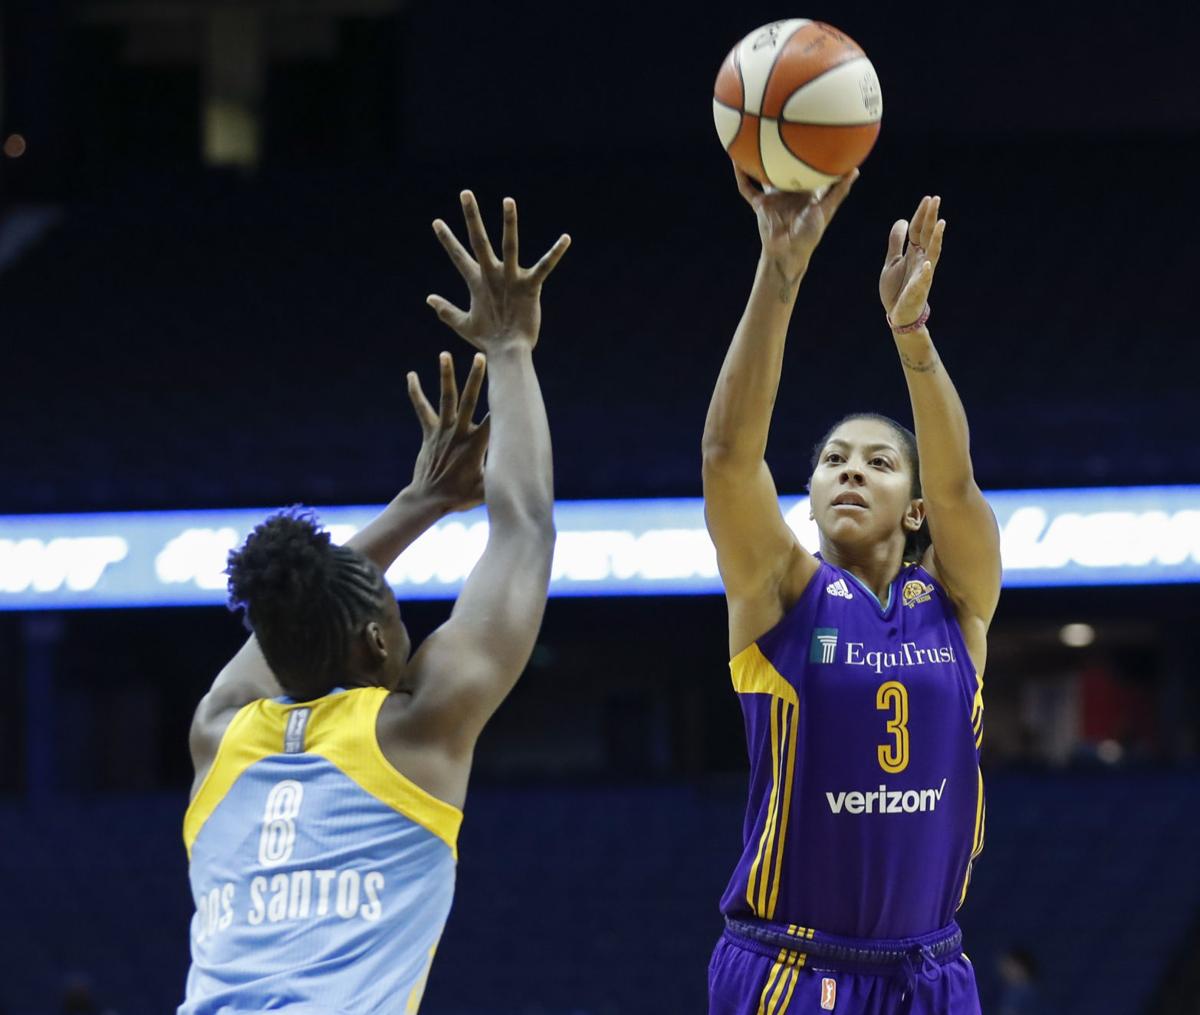 WNBA's Candace Parker makes history as first woman on cover of NBA 2K